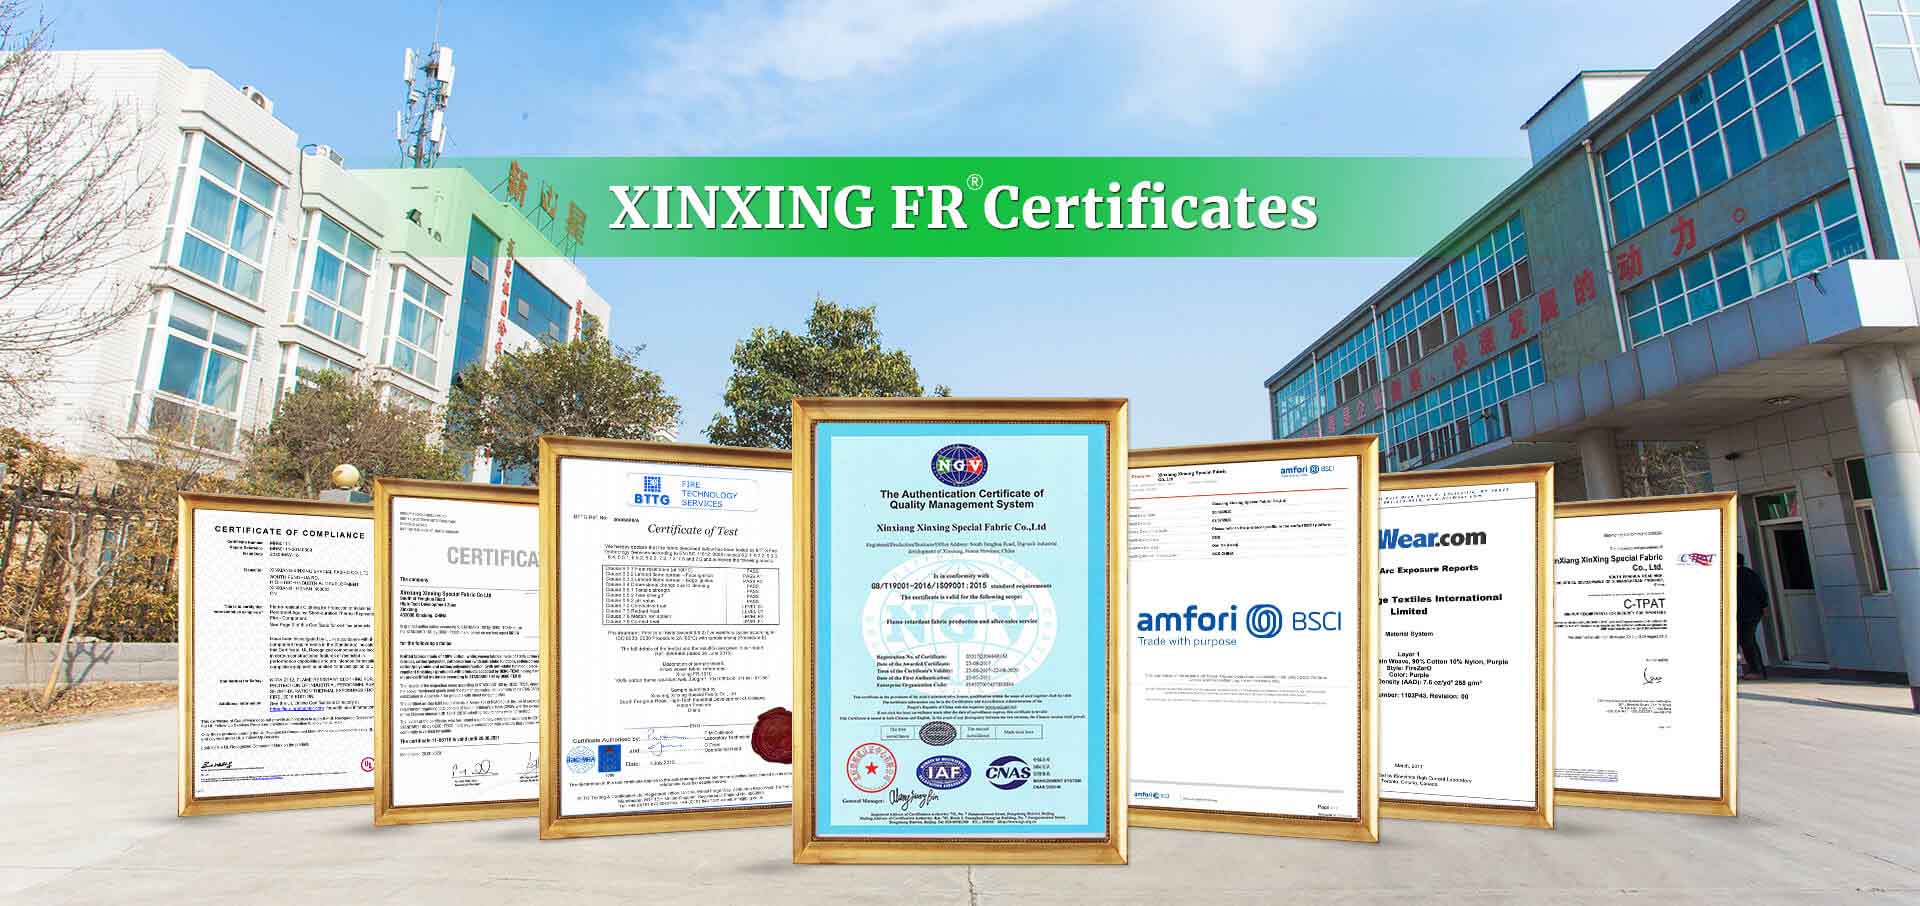 Check out our Fire Proof Fabric Certificate